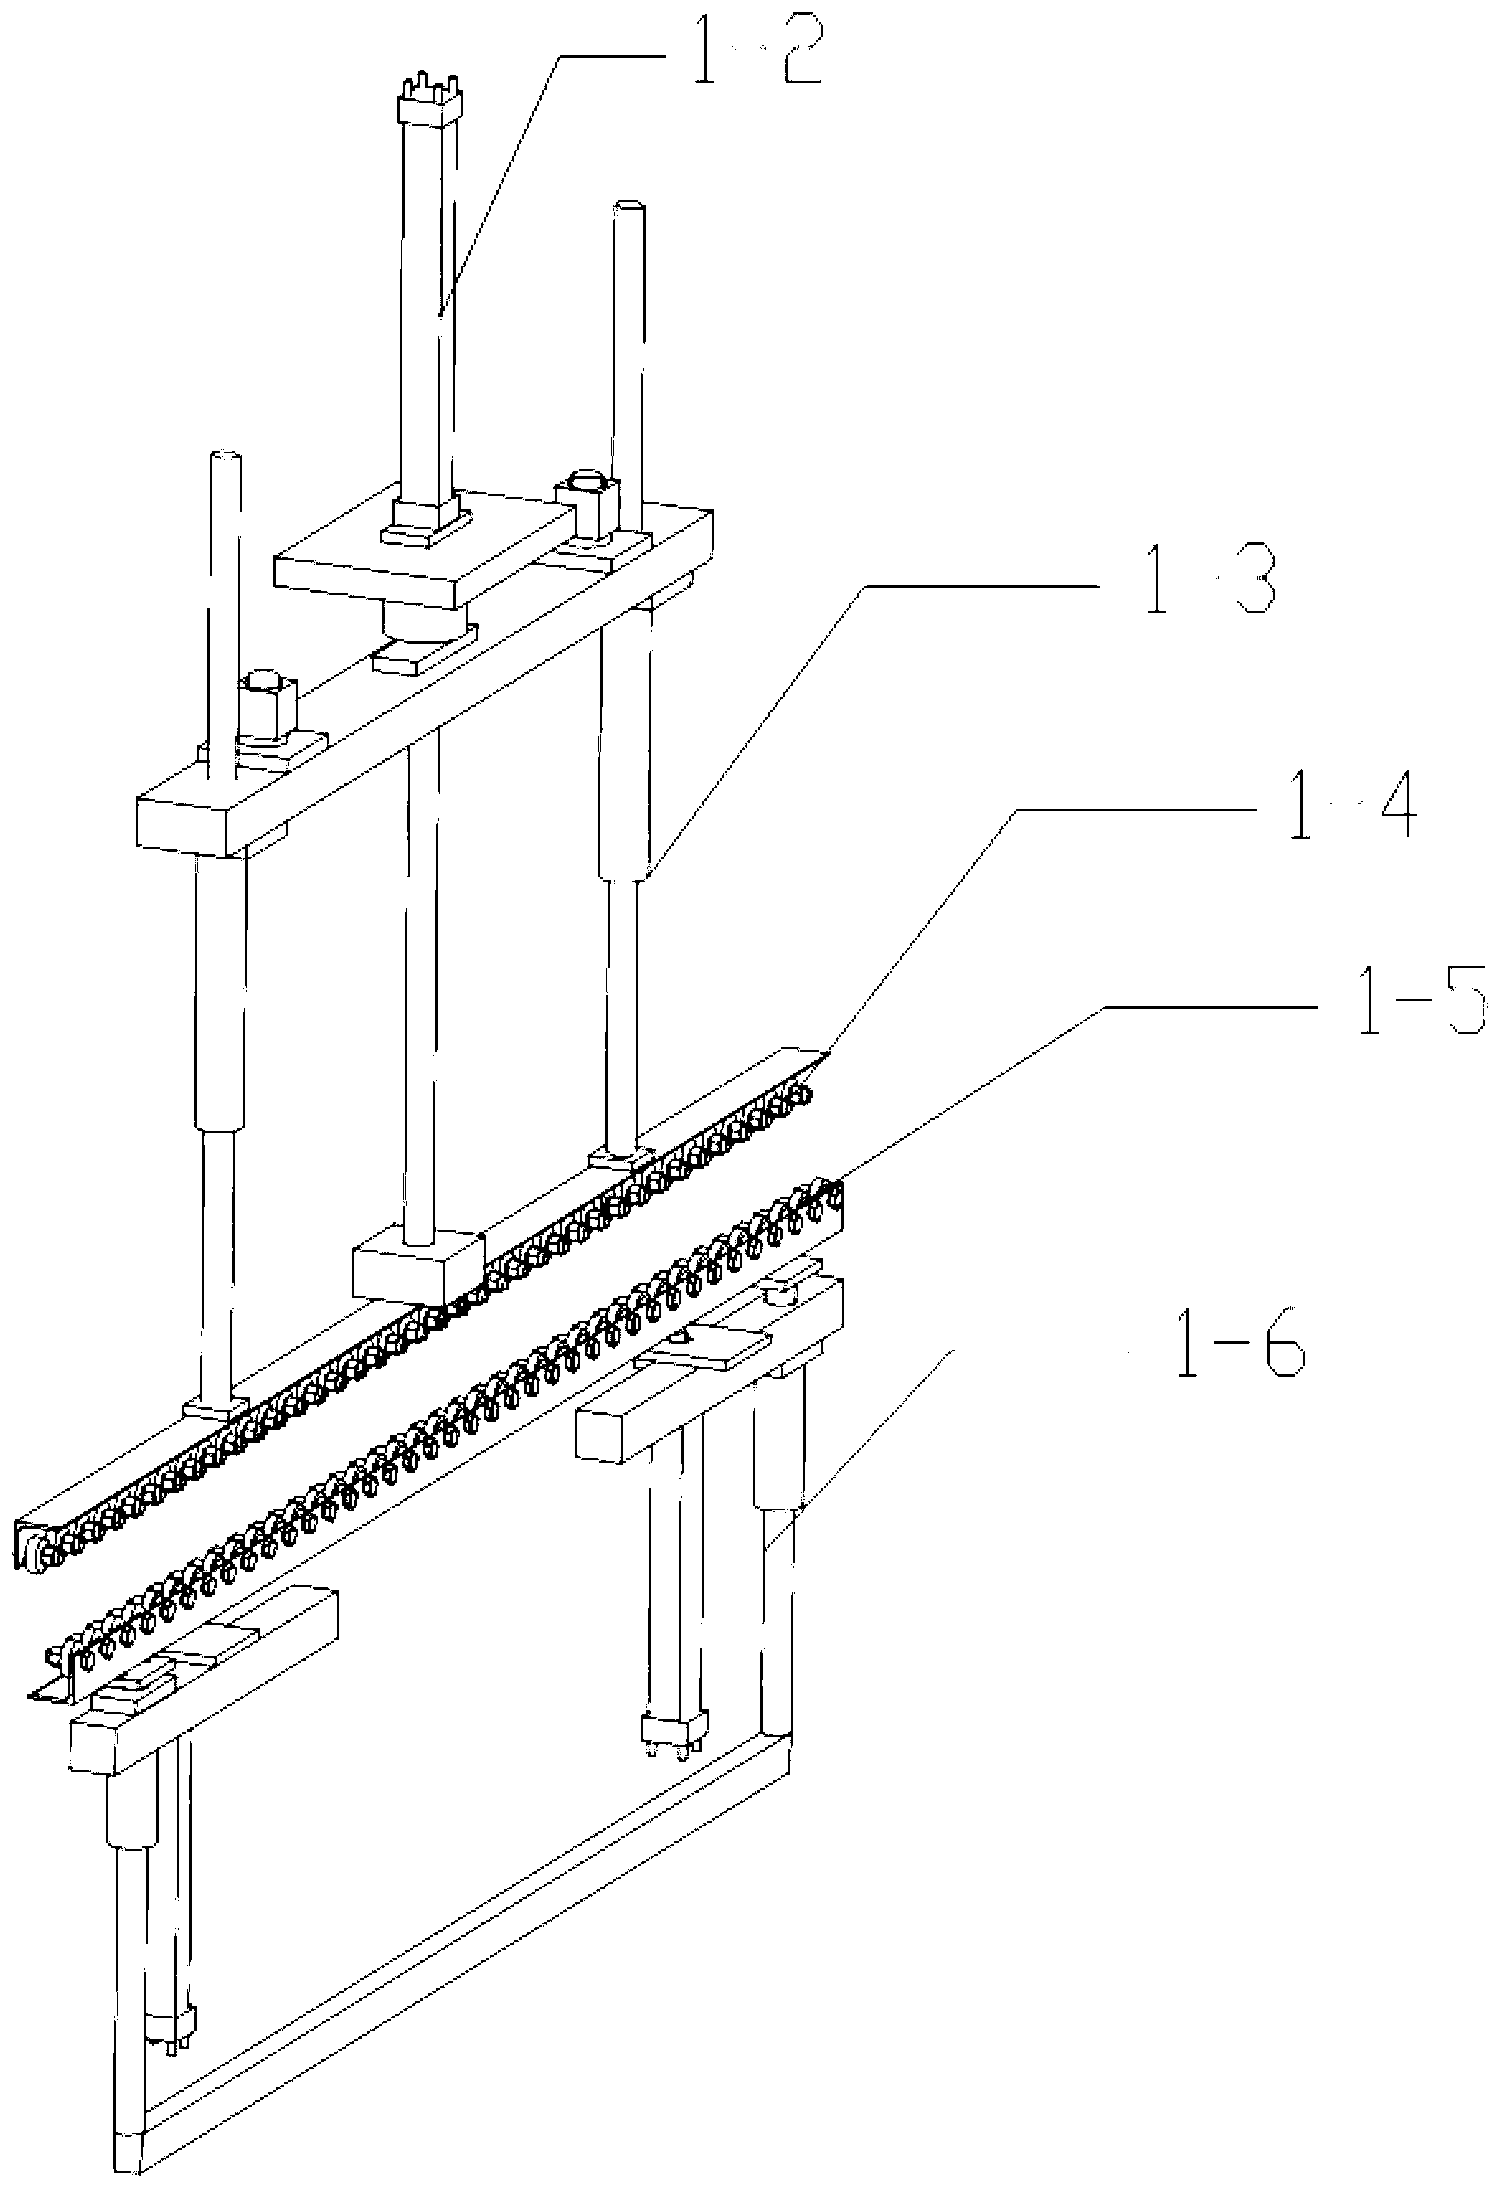 On-line automatic assembly device for H-shaped steel with corrugated web